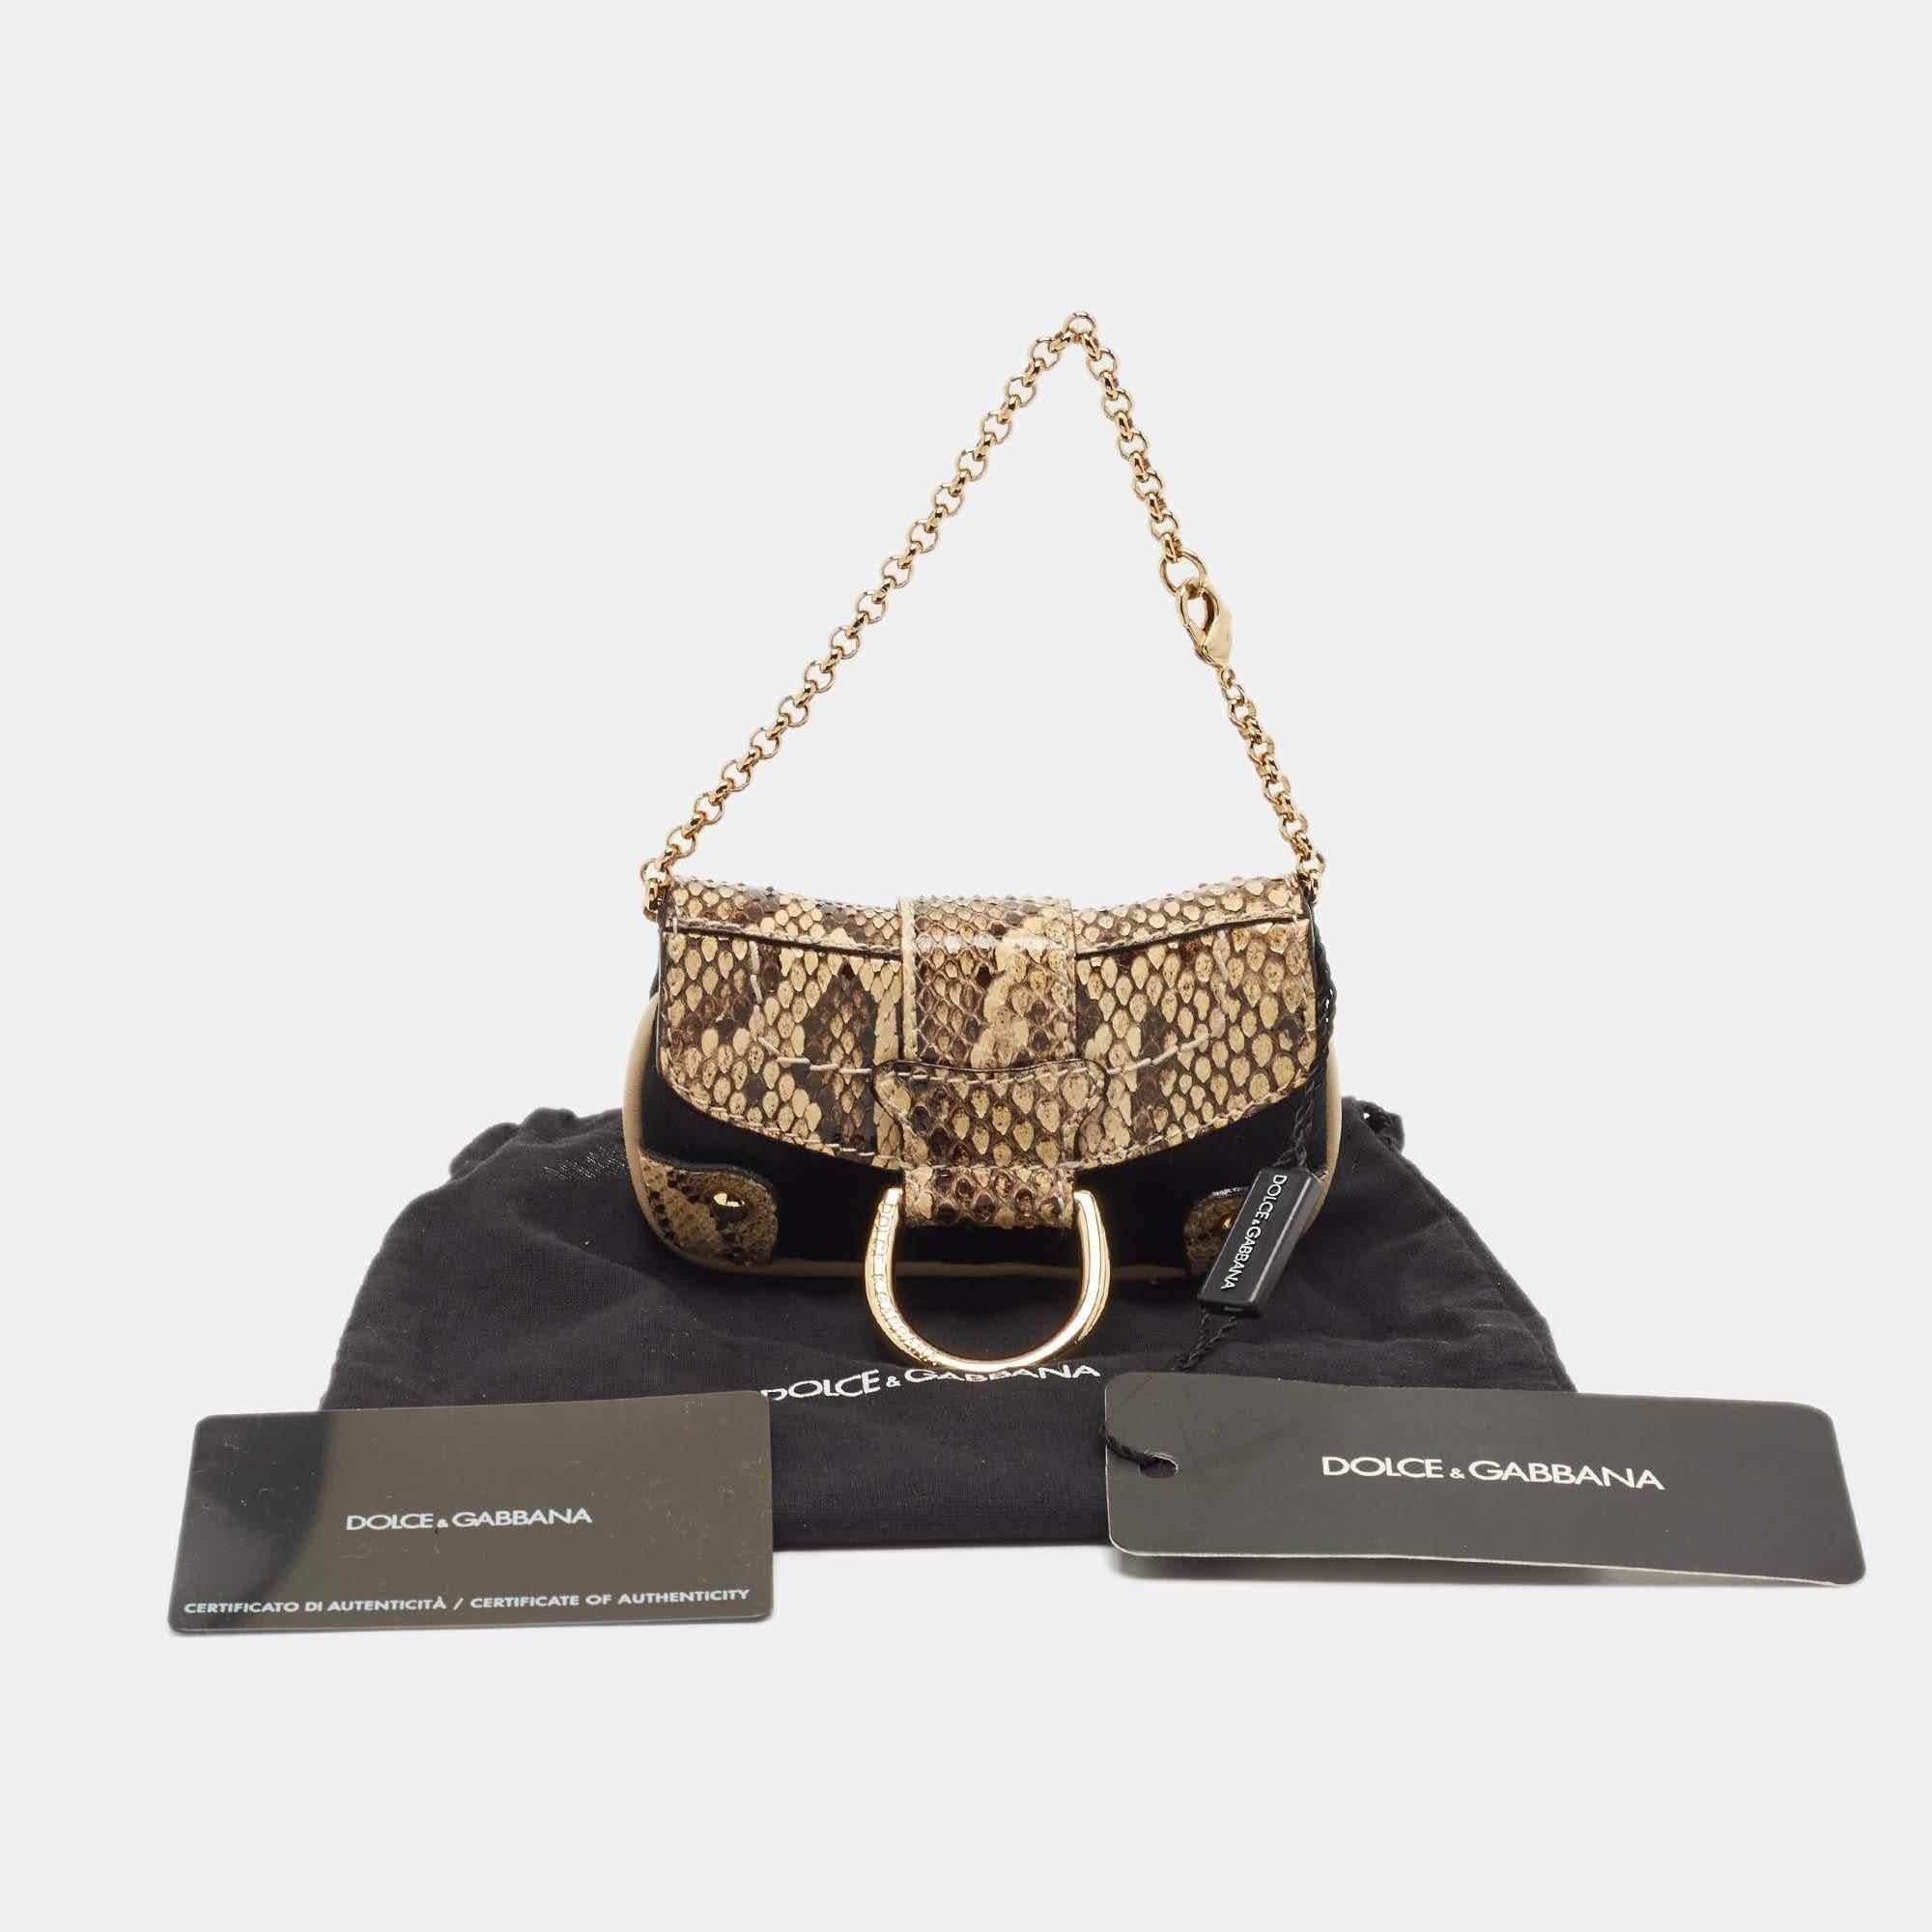 Designed by Dolce & Gabbana, this coin purse made from python leather is the perfect accessory to keep your coins in proper order, as it features multiple slots.

